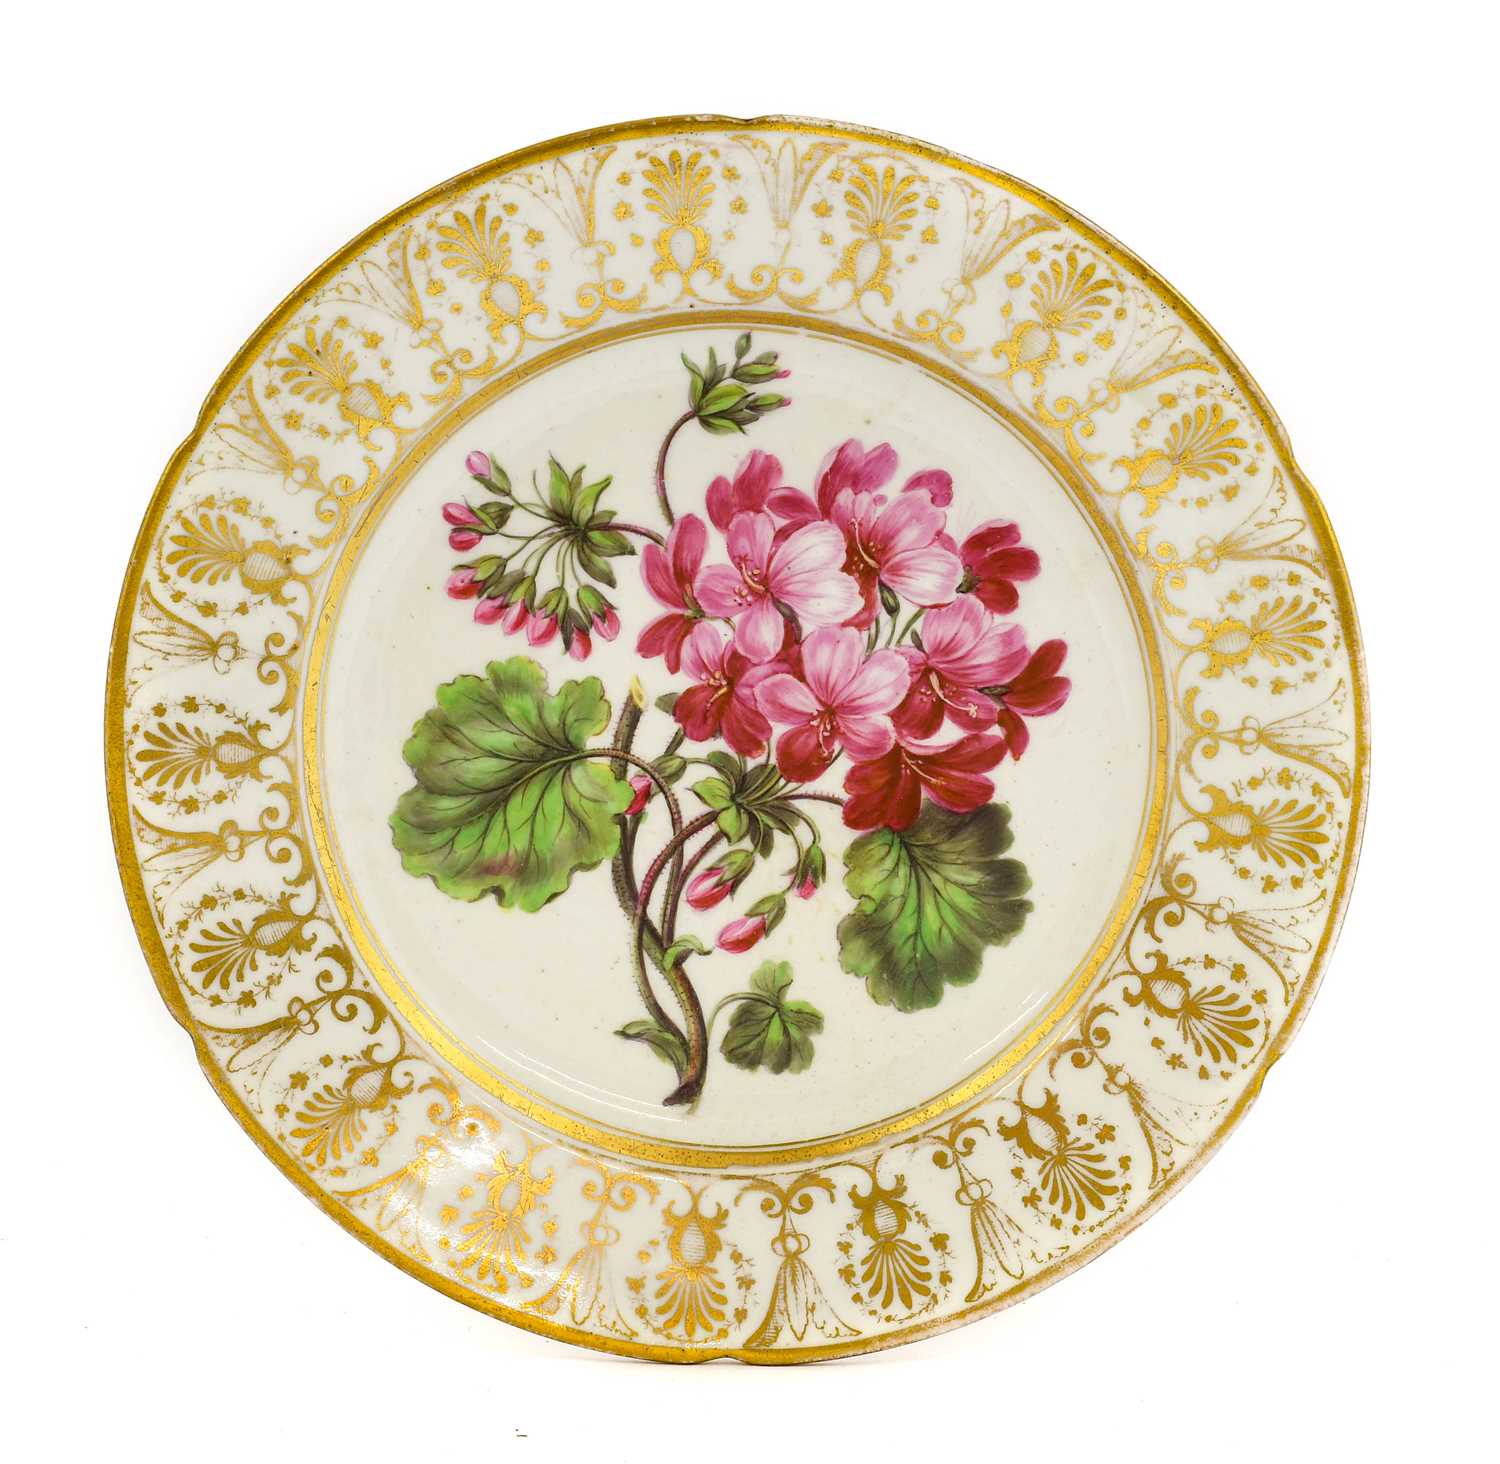 A Coalport Porcelain Plate, circa 1810, painted with a botanical specimen within a gilt anthemion